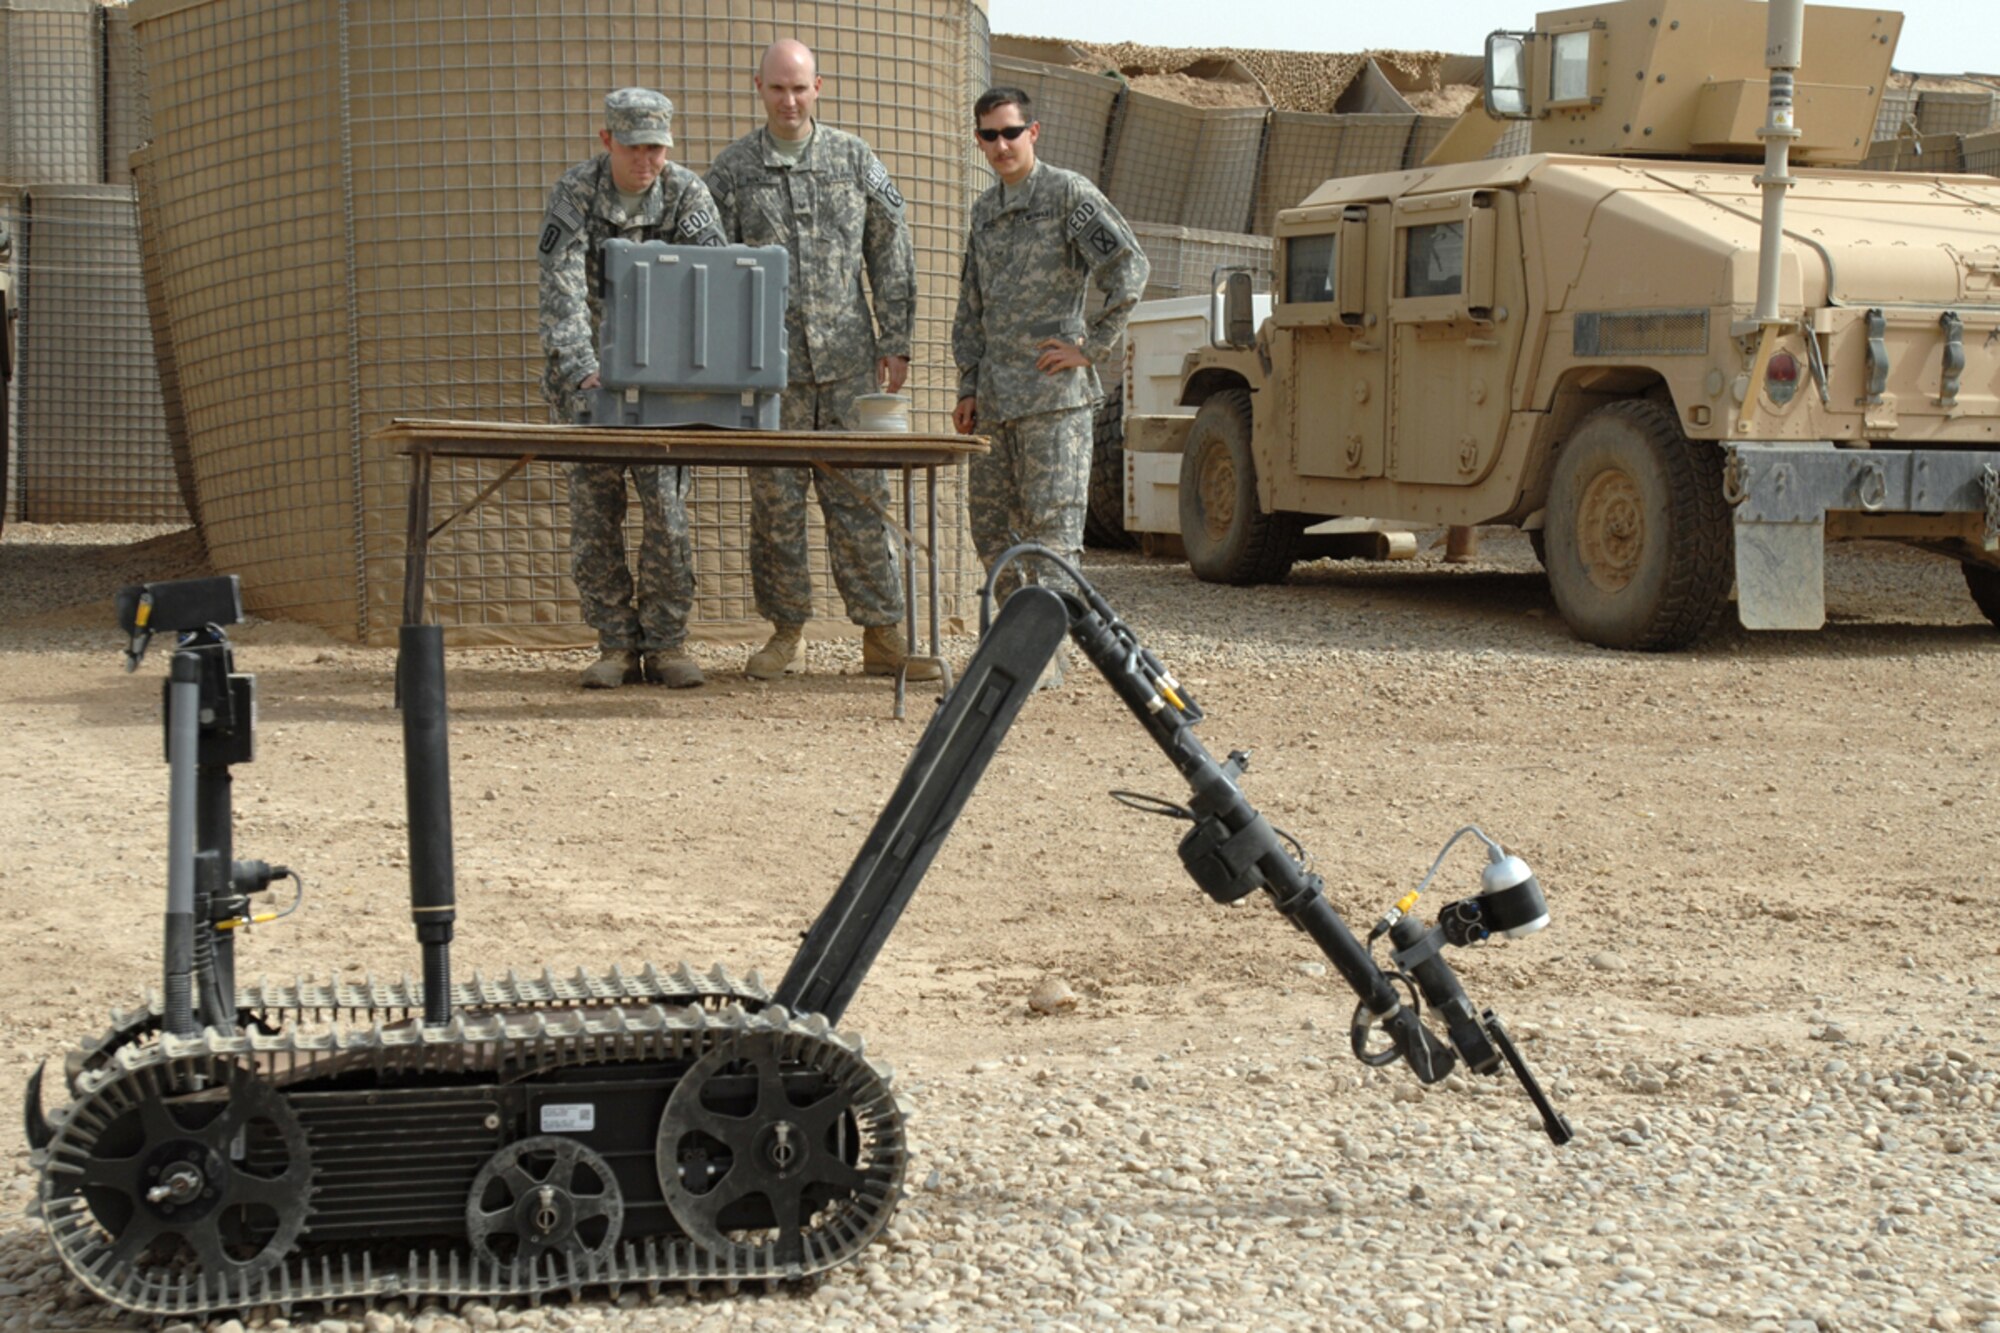 KIRKUK REGIONAL AIR BASE, Iraq – 506th Air Expeditionary Group Explosive Ordnance Disposal flight members Senior Airman Aaron Skelton, Tech. Sgt. Stephen Ray Hunter Jr. and Senior Airman Joshua Brum, run a function check on a TALON robot Sept 14. The teams use the robot to recon and disable roadside bombs. Six Kirkuk RAB EOD Airmen are forward deployed to FOB McHenry where they are embedded with soldiers of the Army’s 10th Mountain Division. (U.S. Air Force photo/Tech. Sgt. Jeff Walston)